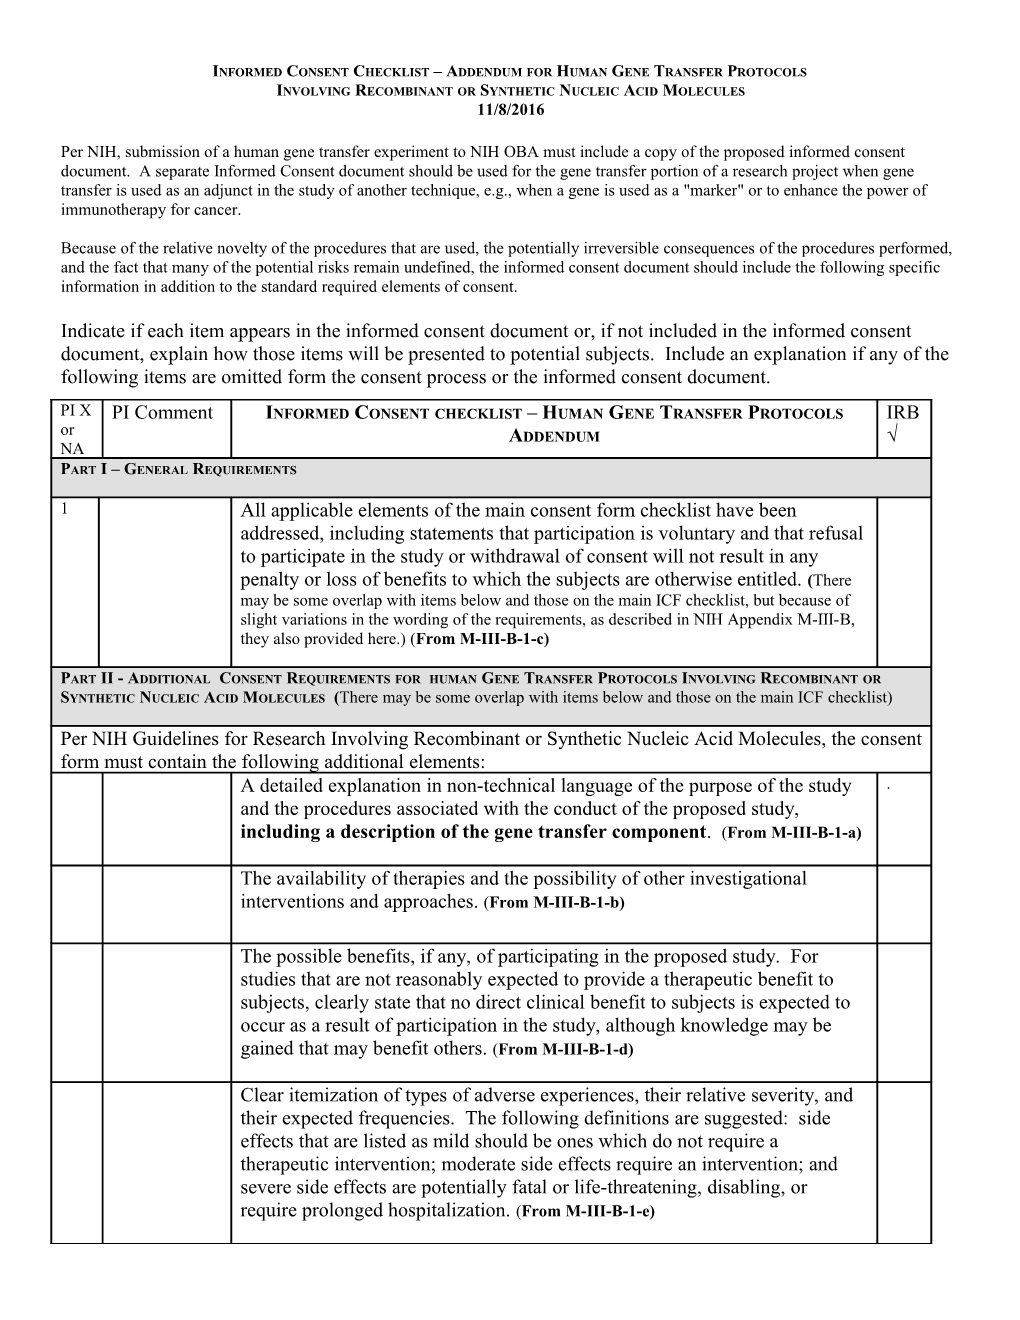 Consent Checklist Additional Elements for Genetic Research